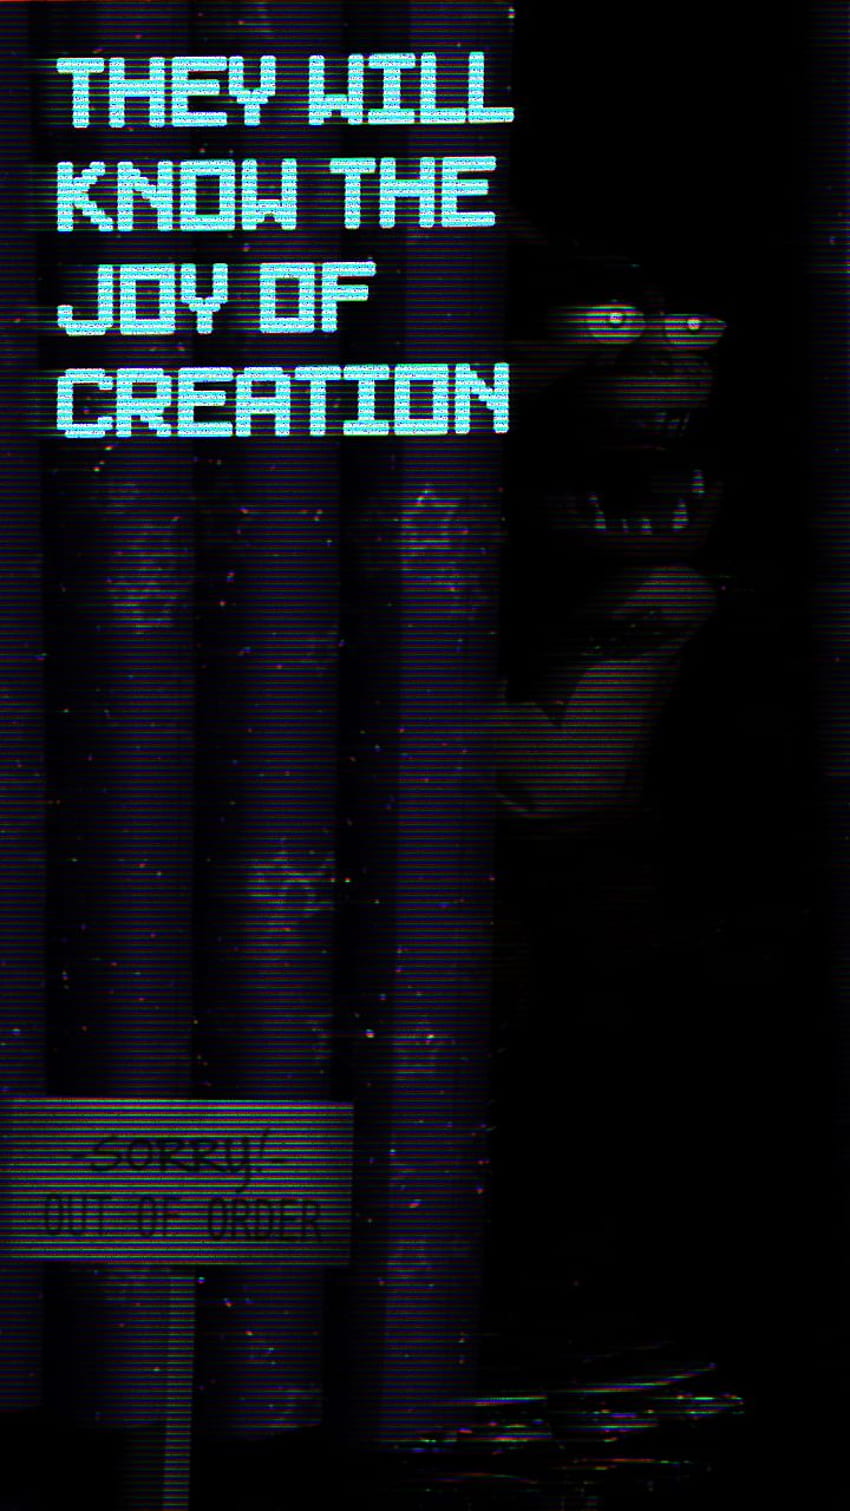 Five Nights at Freddy's (Phone) by BenAnderson - Fur, The Joy of Creation HD phone wallpaper